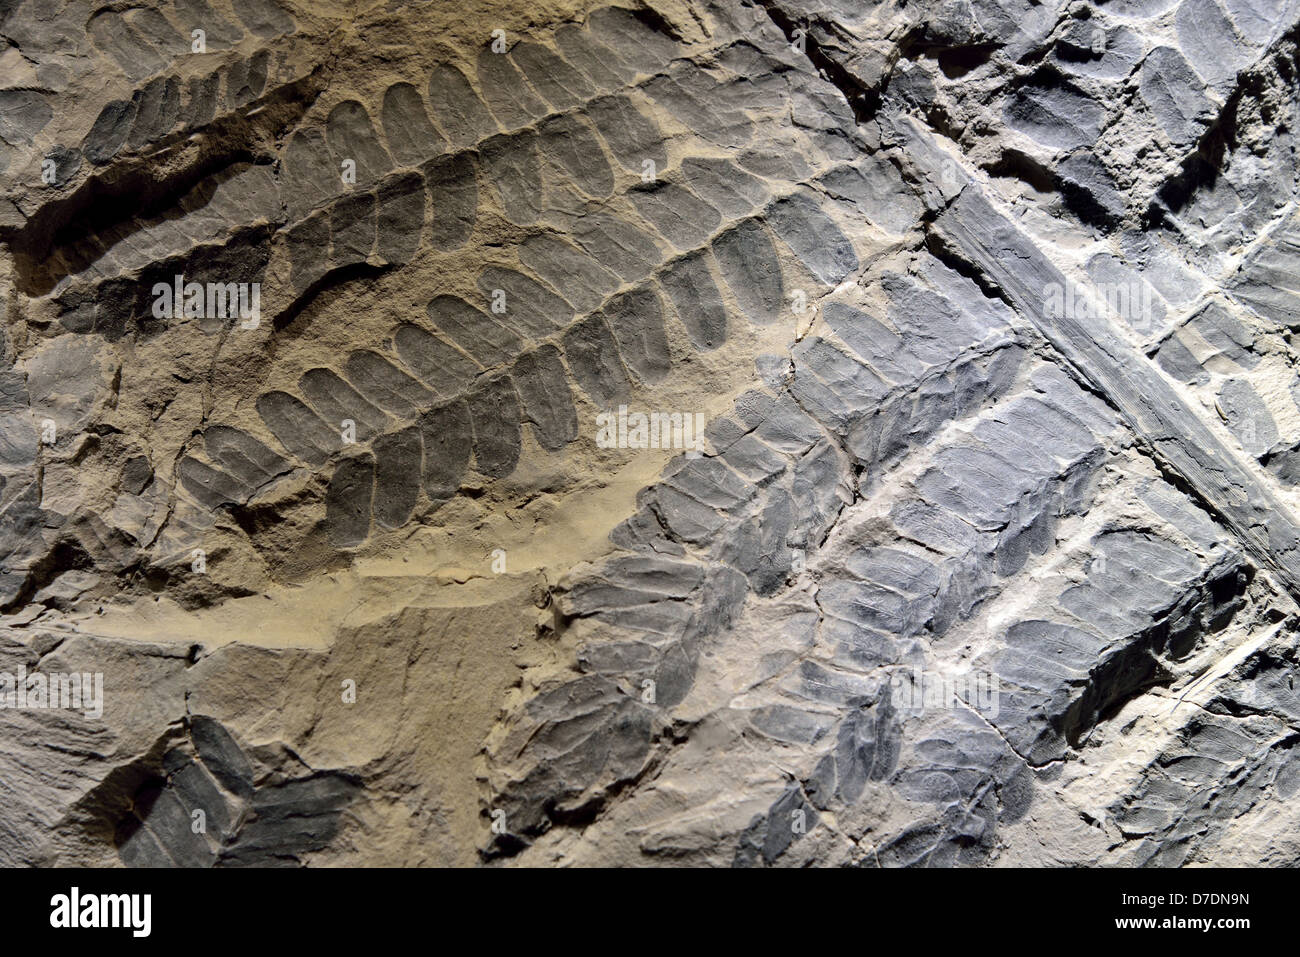 fossil imprint of seed fern Neuropteris leaves. Carboniferous age. Stock Photo